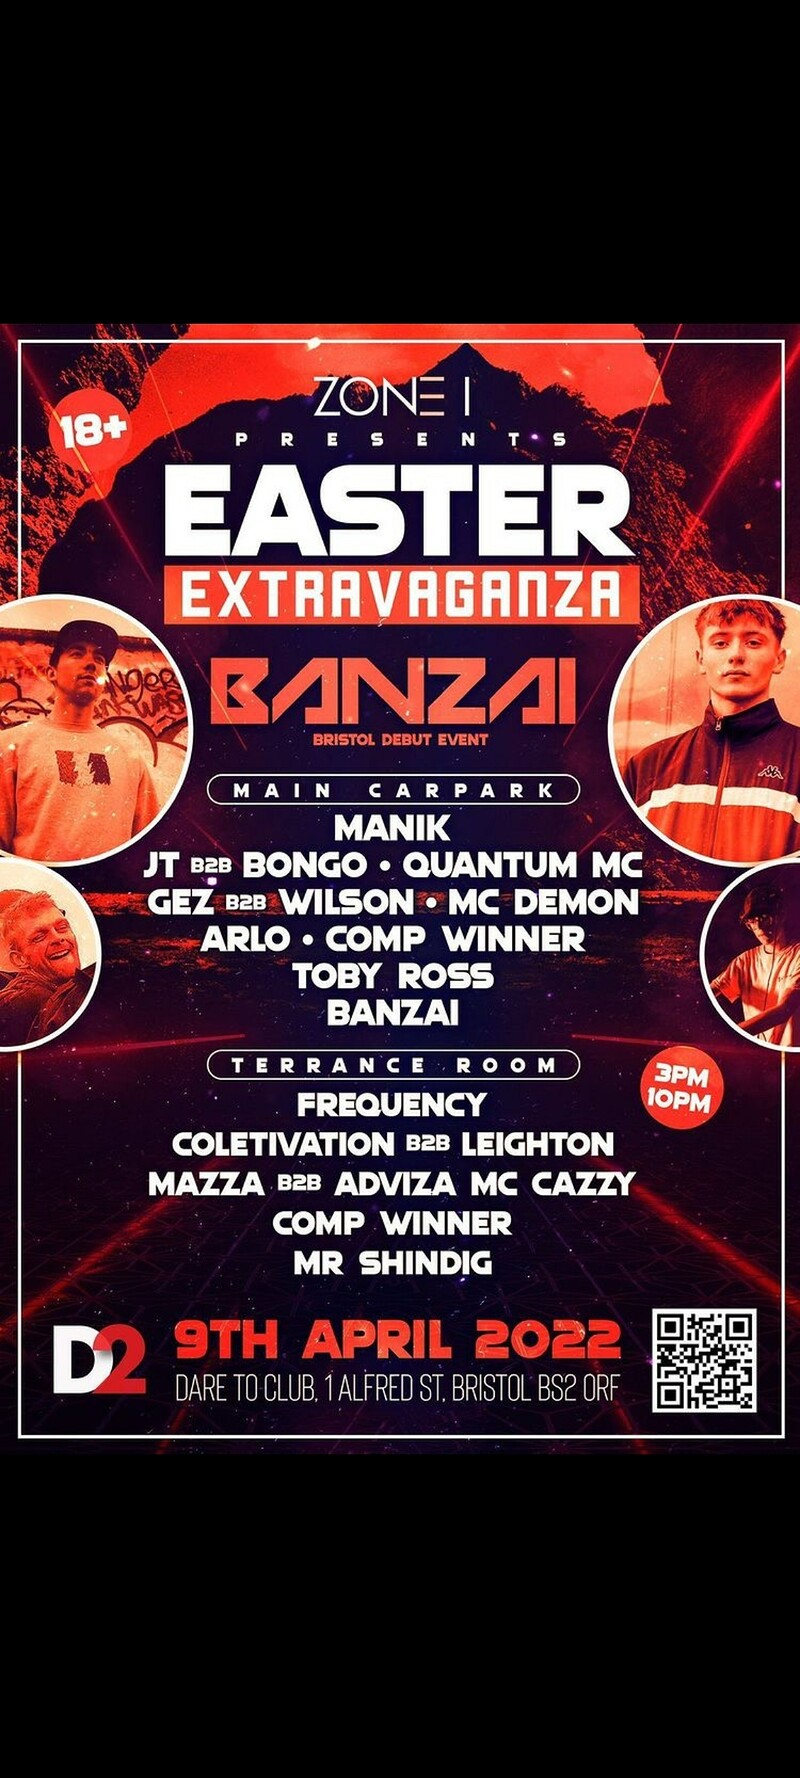 Zone 1 Easter Extravaganza at Dare to Club